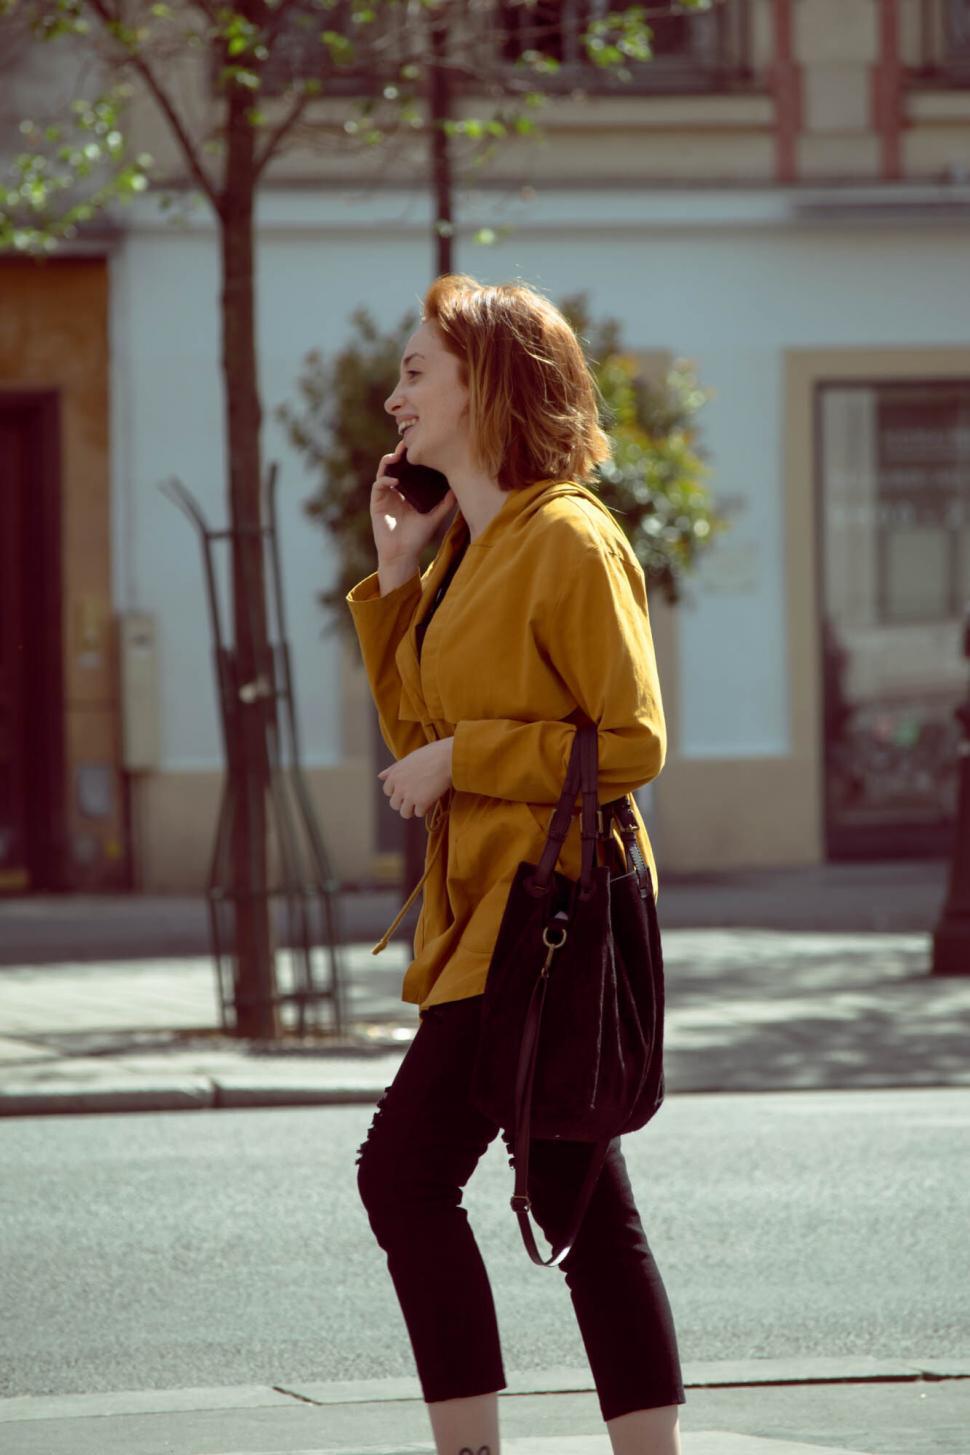 Free Image of Woman walking and talking on the phone 